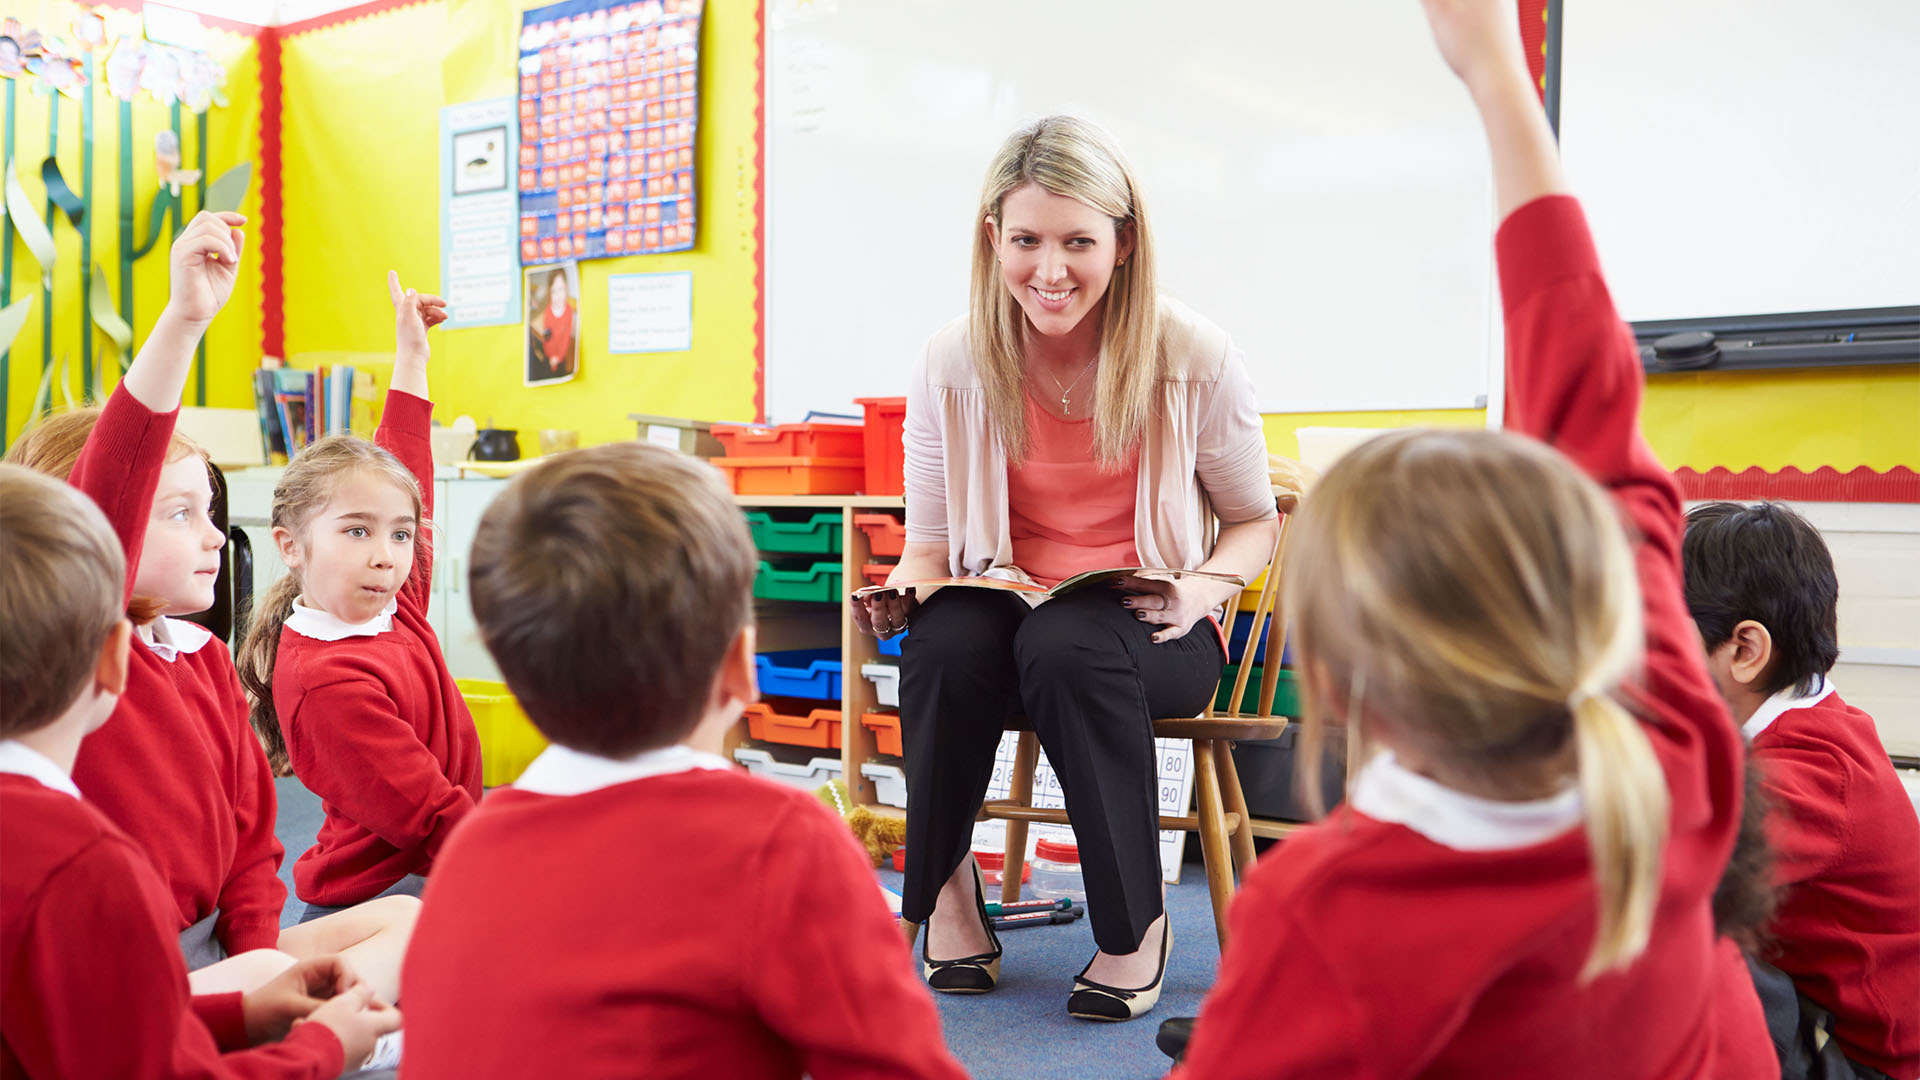 Want to make a career change to teaching